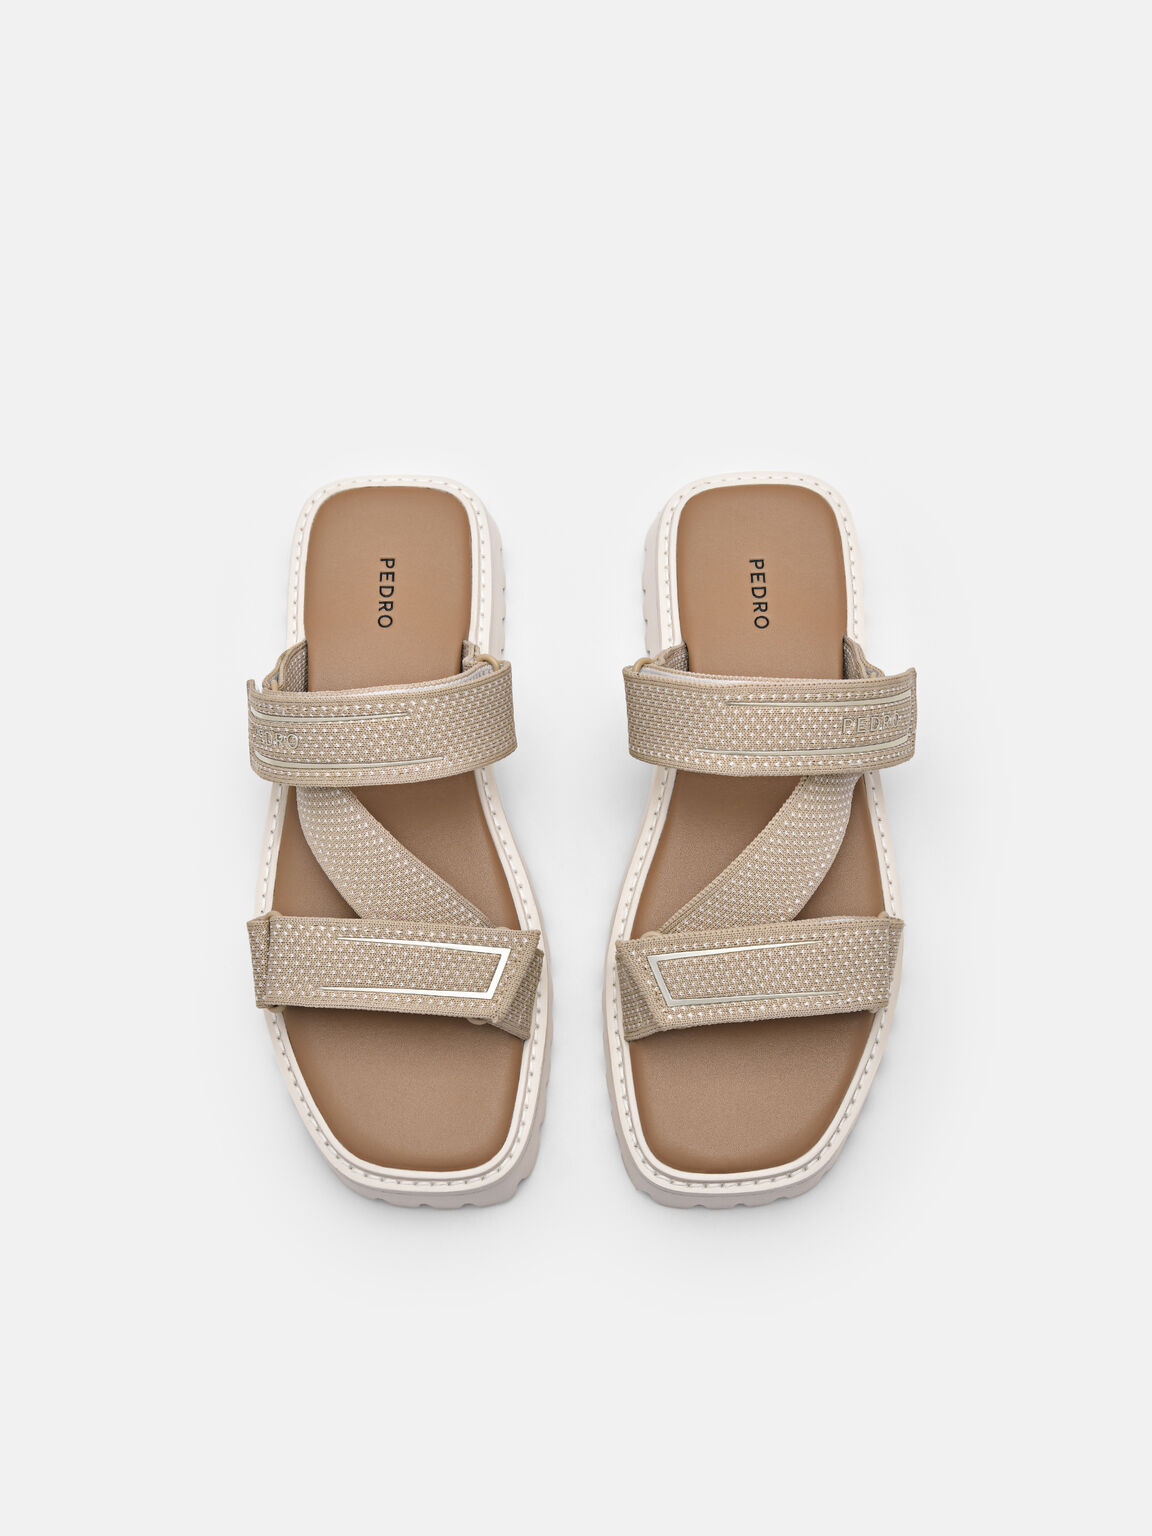 Ronni Knitted Sandals, Sand, hi-res